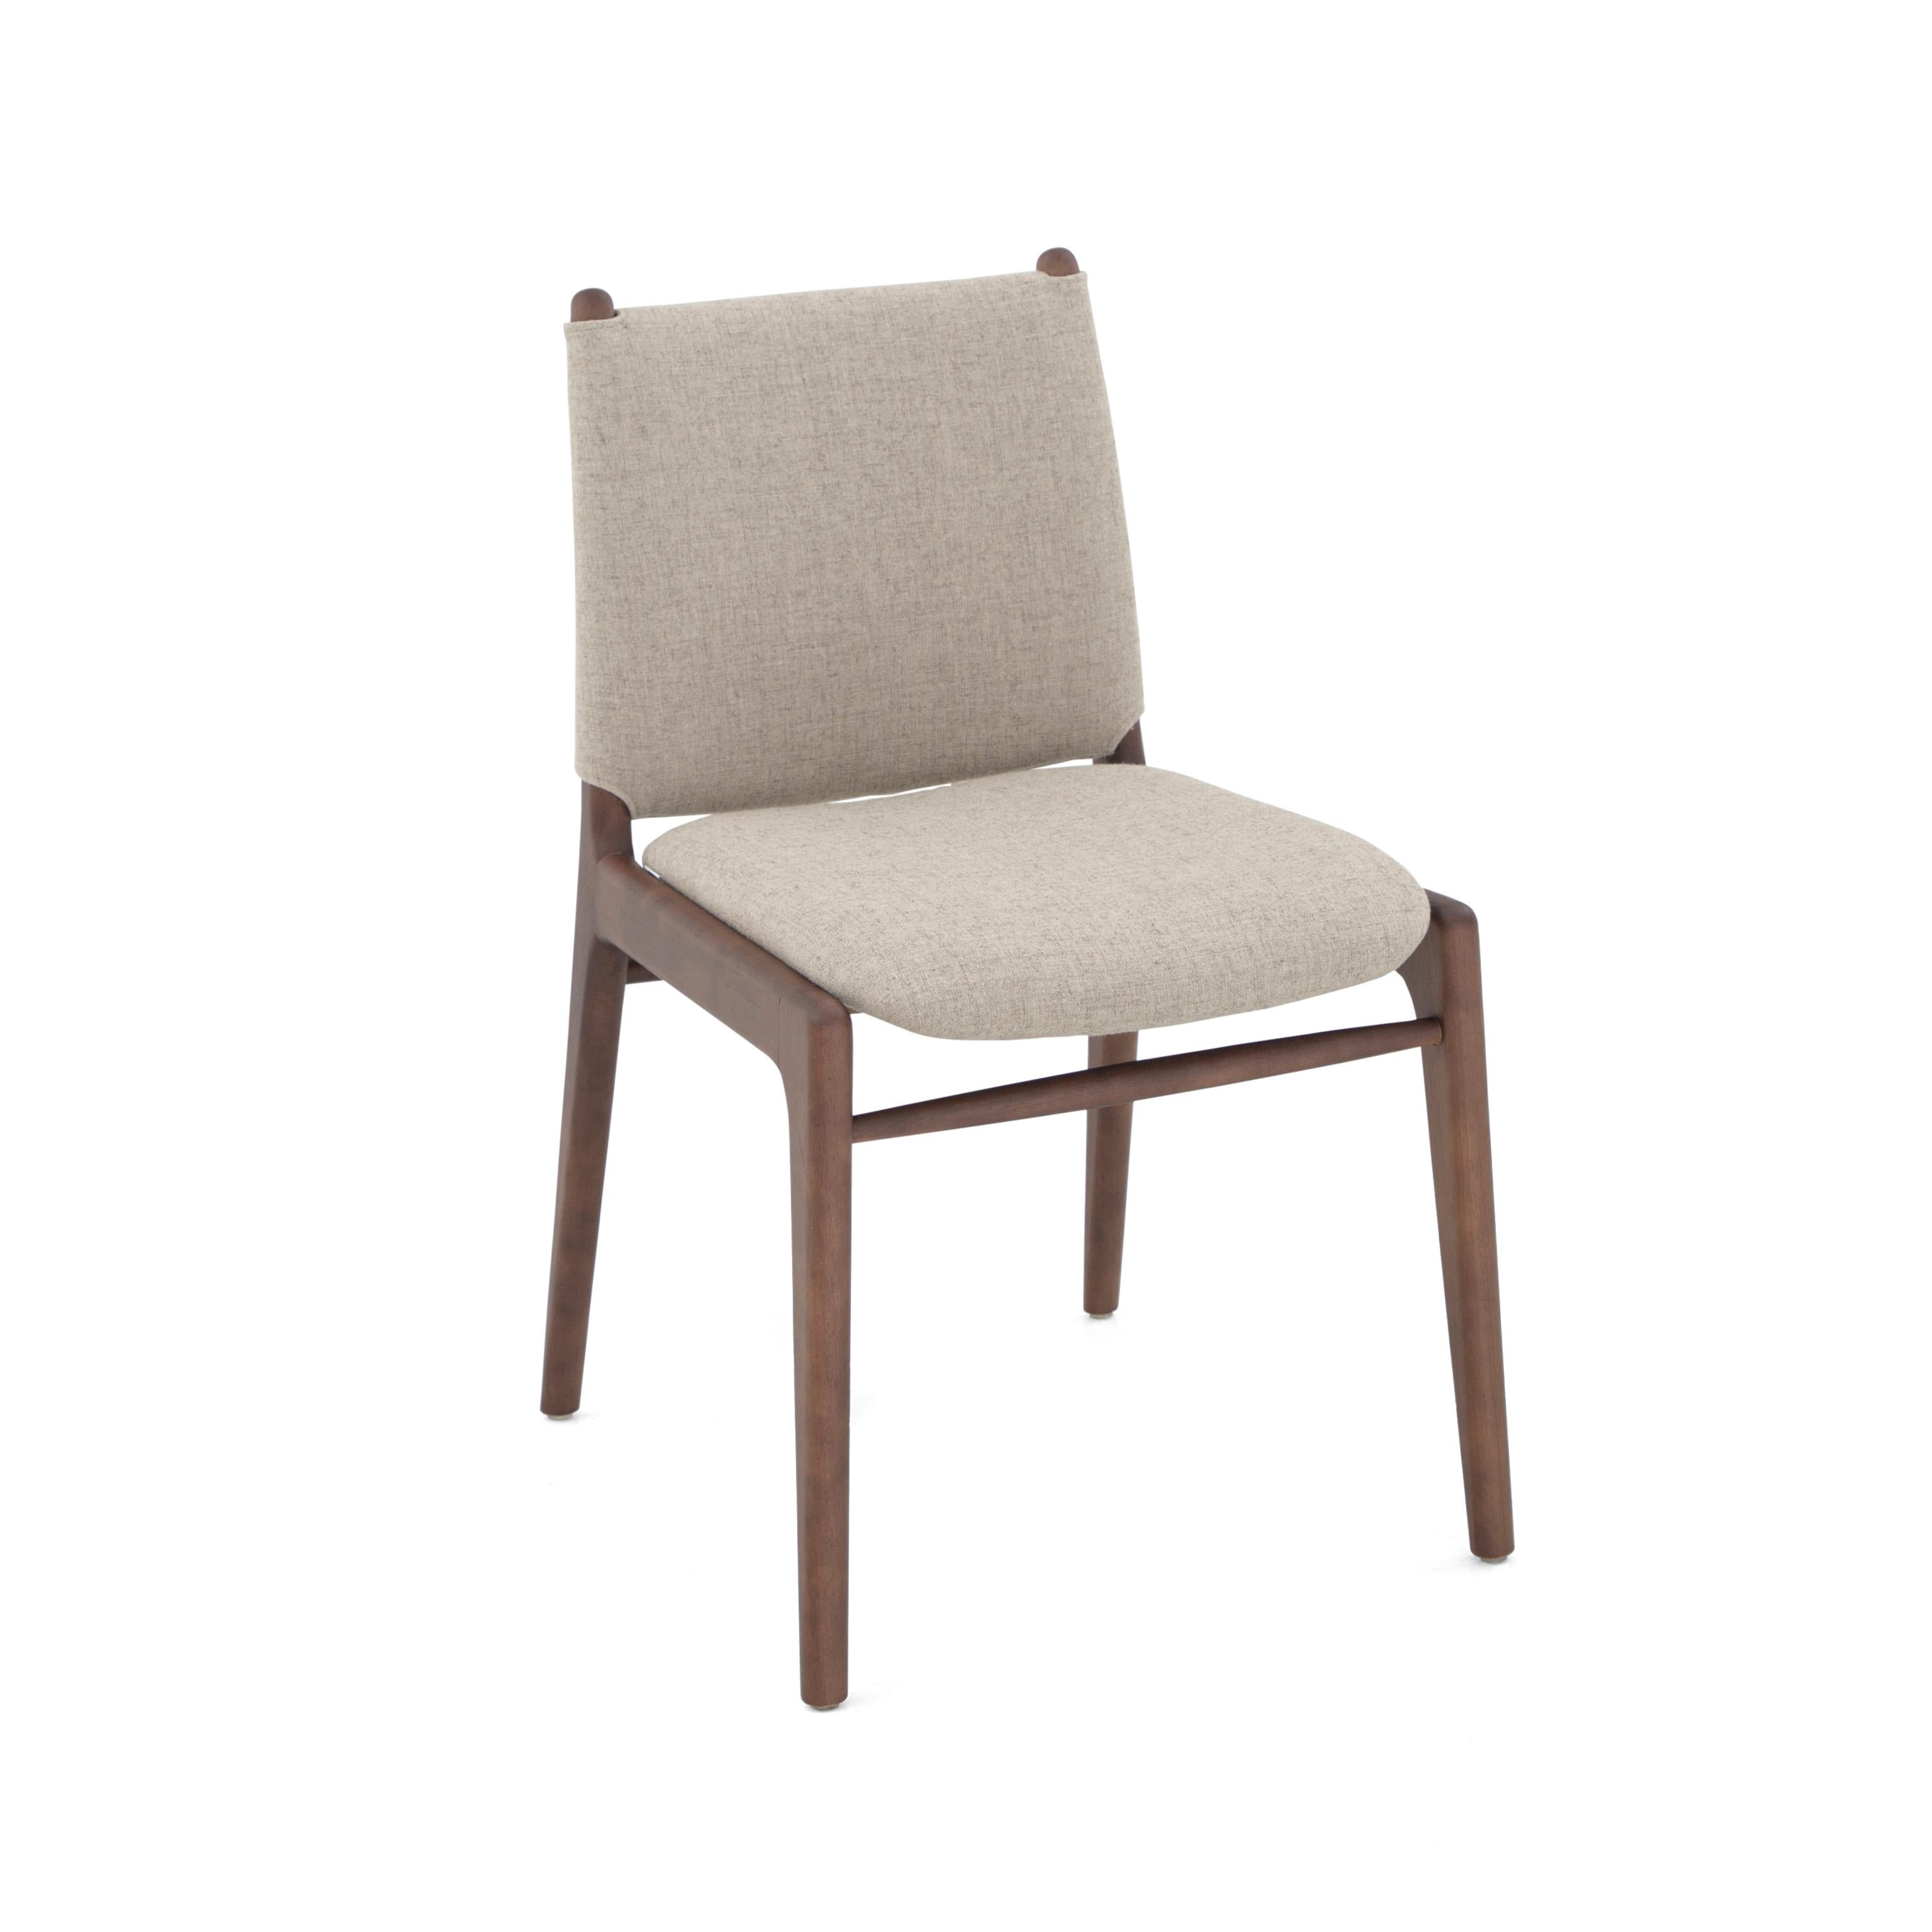 Contemporary Cappio Dining Chair in Walnut Wood Finish with Beige Fabric, set of 2 For Sale